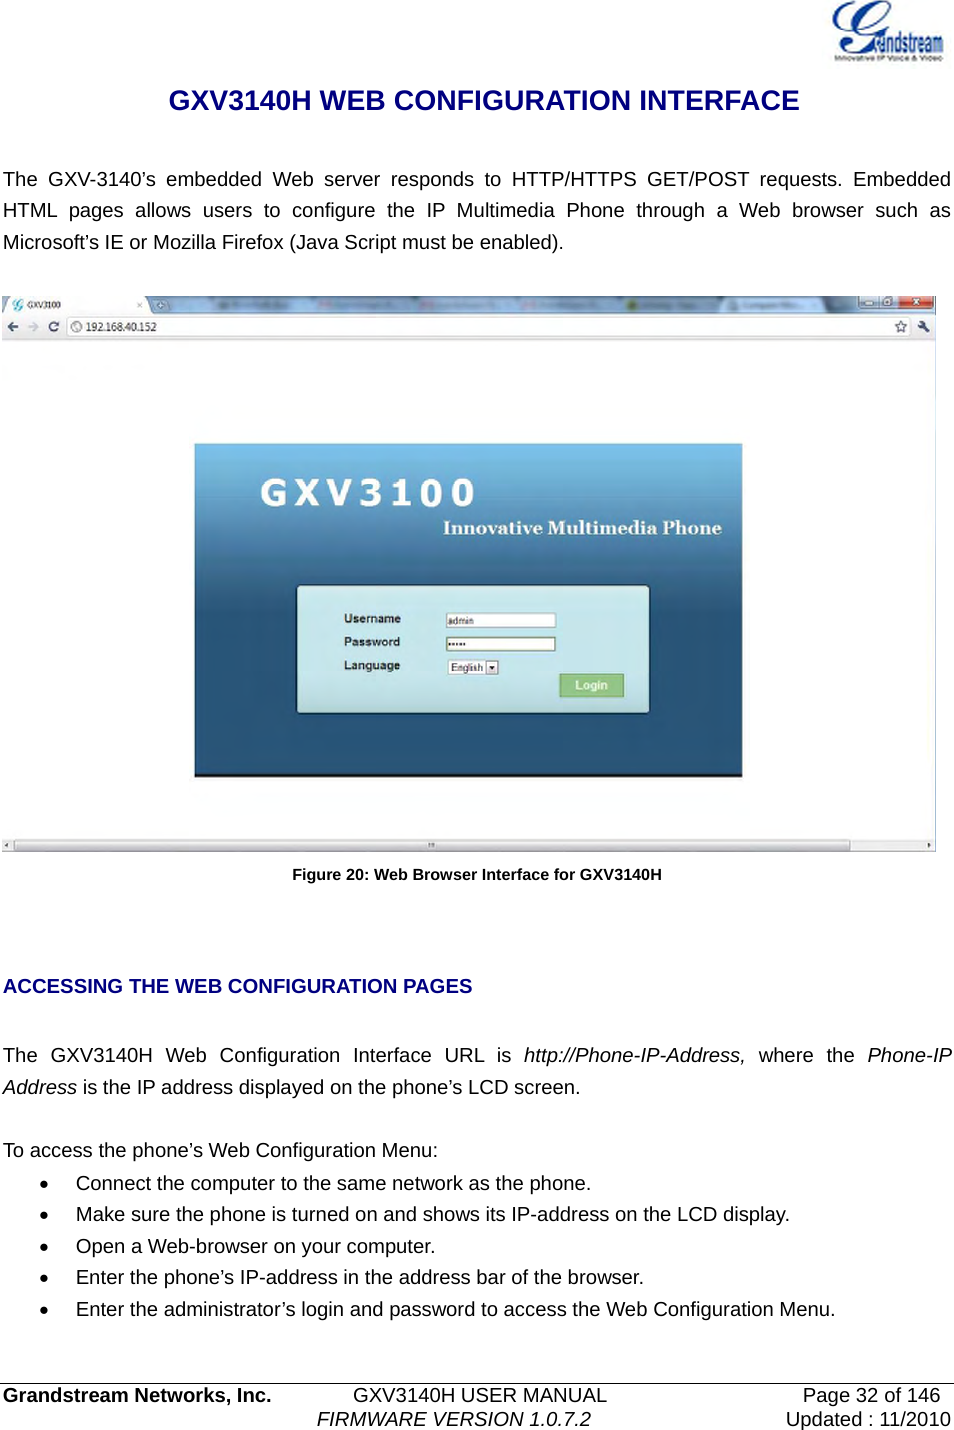   Grandstream Networks, Inc.        GXV3140H USER MANUAL                  Page 32 of 146                                FIRMWARE VERSION 1.0.7.2 Updated : 11/2010    GXV3140H WEB CONFIGURATION INTERFACE  The GXV-3140’s embedded Web server responds to HTTP/HTTPS GET/POST requests. Embedded HTML pages allows users to configure the IP Multimedia Phone through a Web browser such as Microsoft’s IE or Mozilla Firefox (Java Script must be enabled).     Figure 20: Web Browser Interface for GXV3140H  ACCESSING THE WEB CONFIGURATION PAGES  The GXV3140H Web Configuration Interface URL is http://Phone-IP-Address,  where the Phone-IP Address is the IP address displayed on the phone’s LCD screen.  To access the phone’s Web Configuration Menu: •  Connect the computer to the same network as the phone. •  Make sure the phone is turned on and shows its IP-address on the LCD display. •  Open a Web-browser on your computer. •  Enter the phone’s IP-address in the address bar of the browser. •  Enter the administrator’s login and password to access the Web Configuration Menu.      